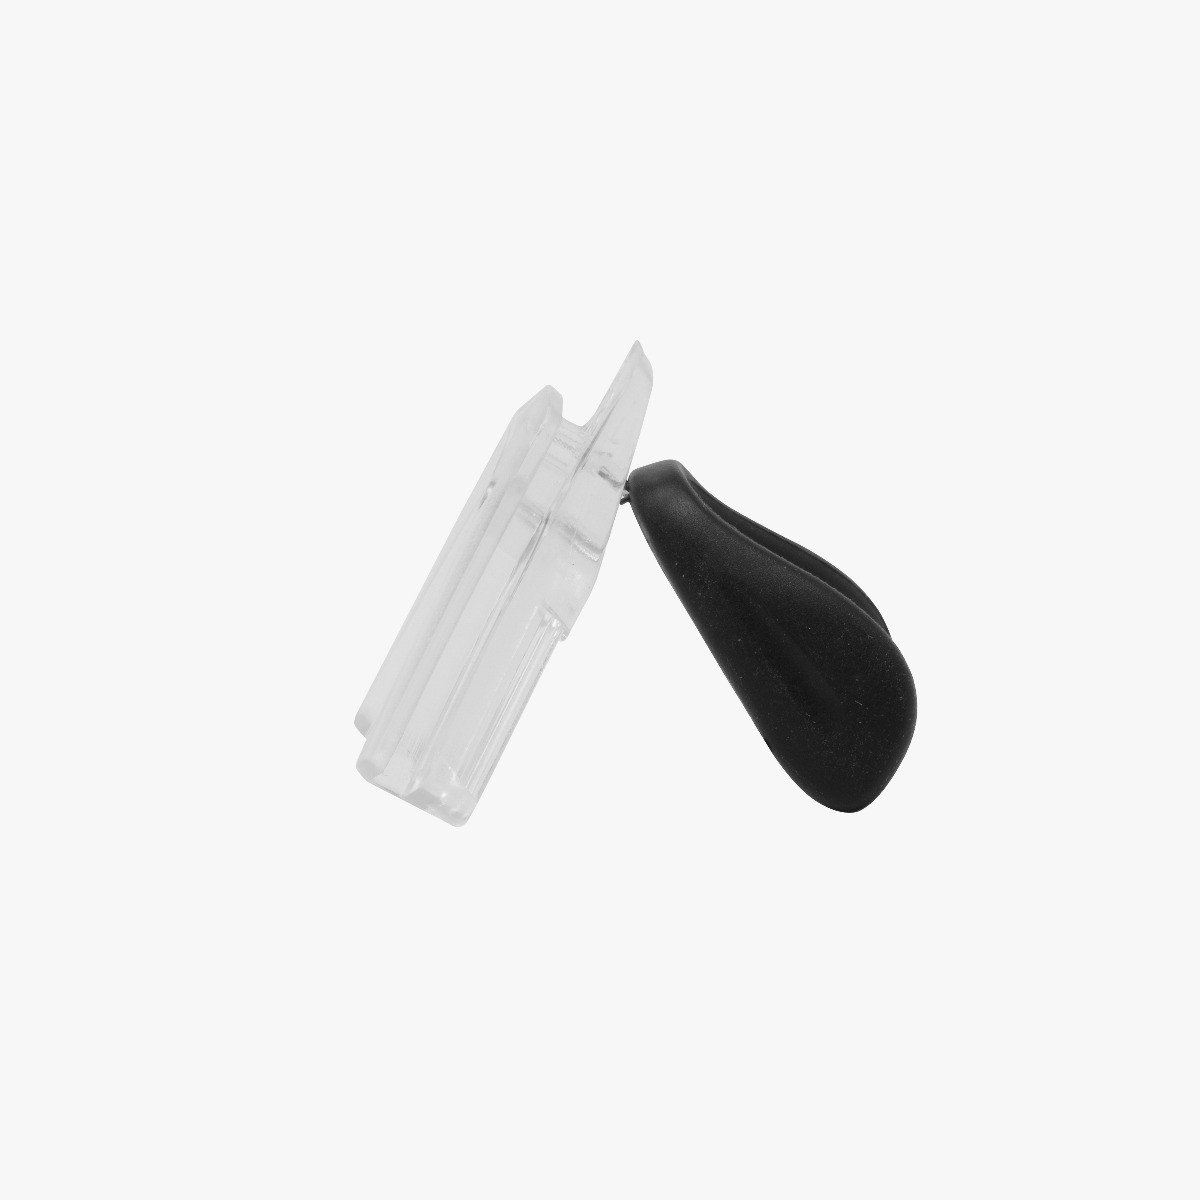 Scicon Sports | Aeroshade XL Replacement Nose Piece Flexi Fit - Crystal Gloss - SP1036